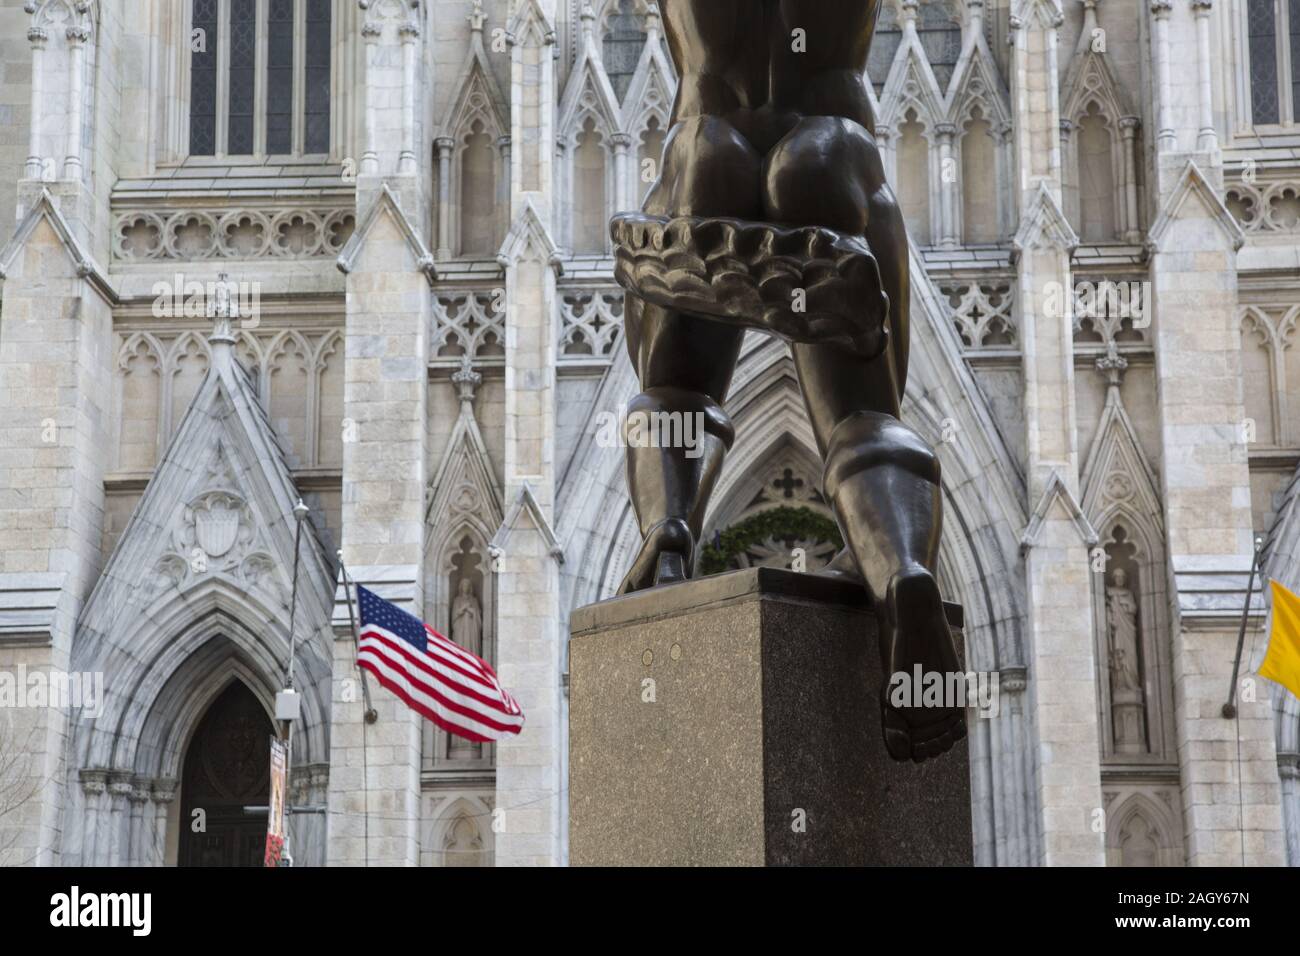 Coming out of Rockefeller Center seeing the rear end of Atlas with Saint Patrick's Cathedral across the street on 5th Avenue. Stock Photo